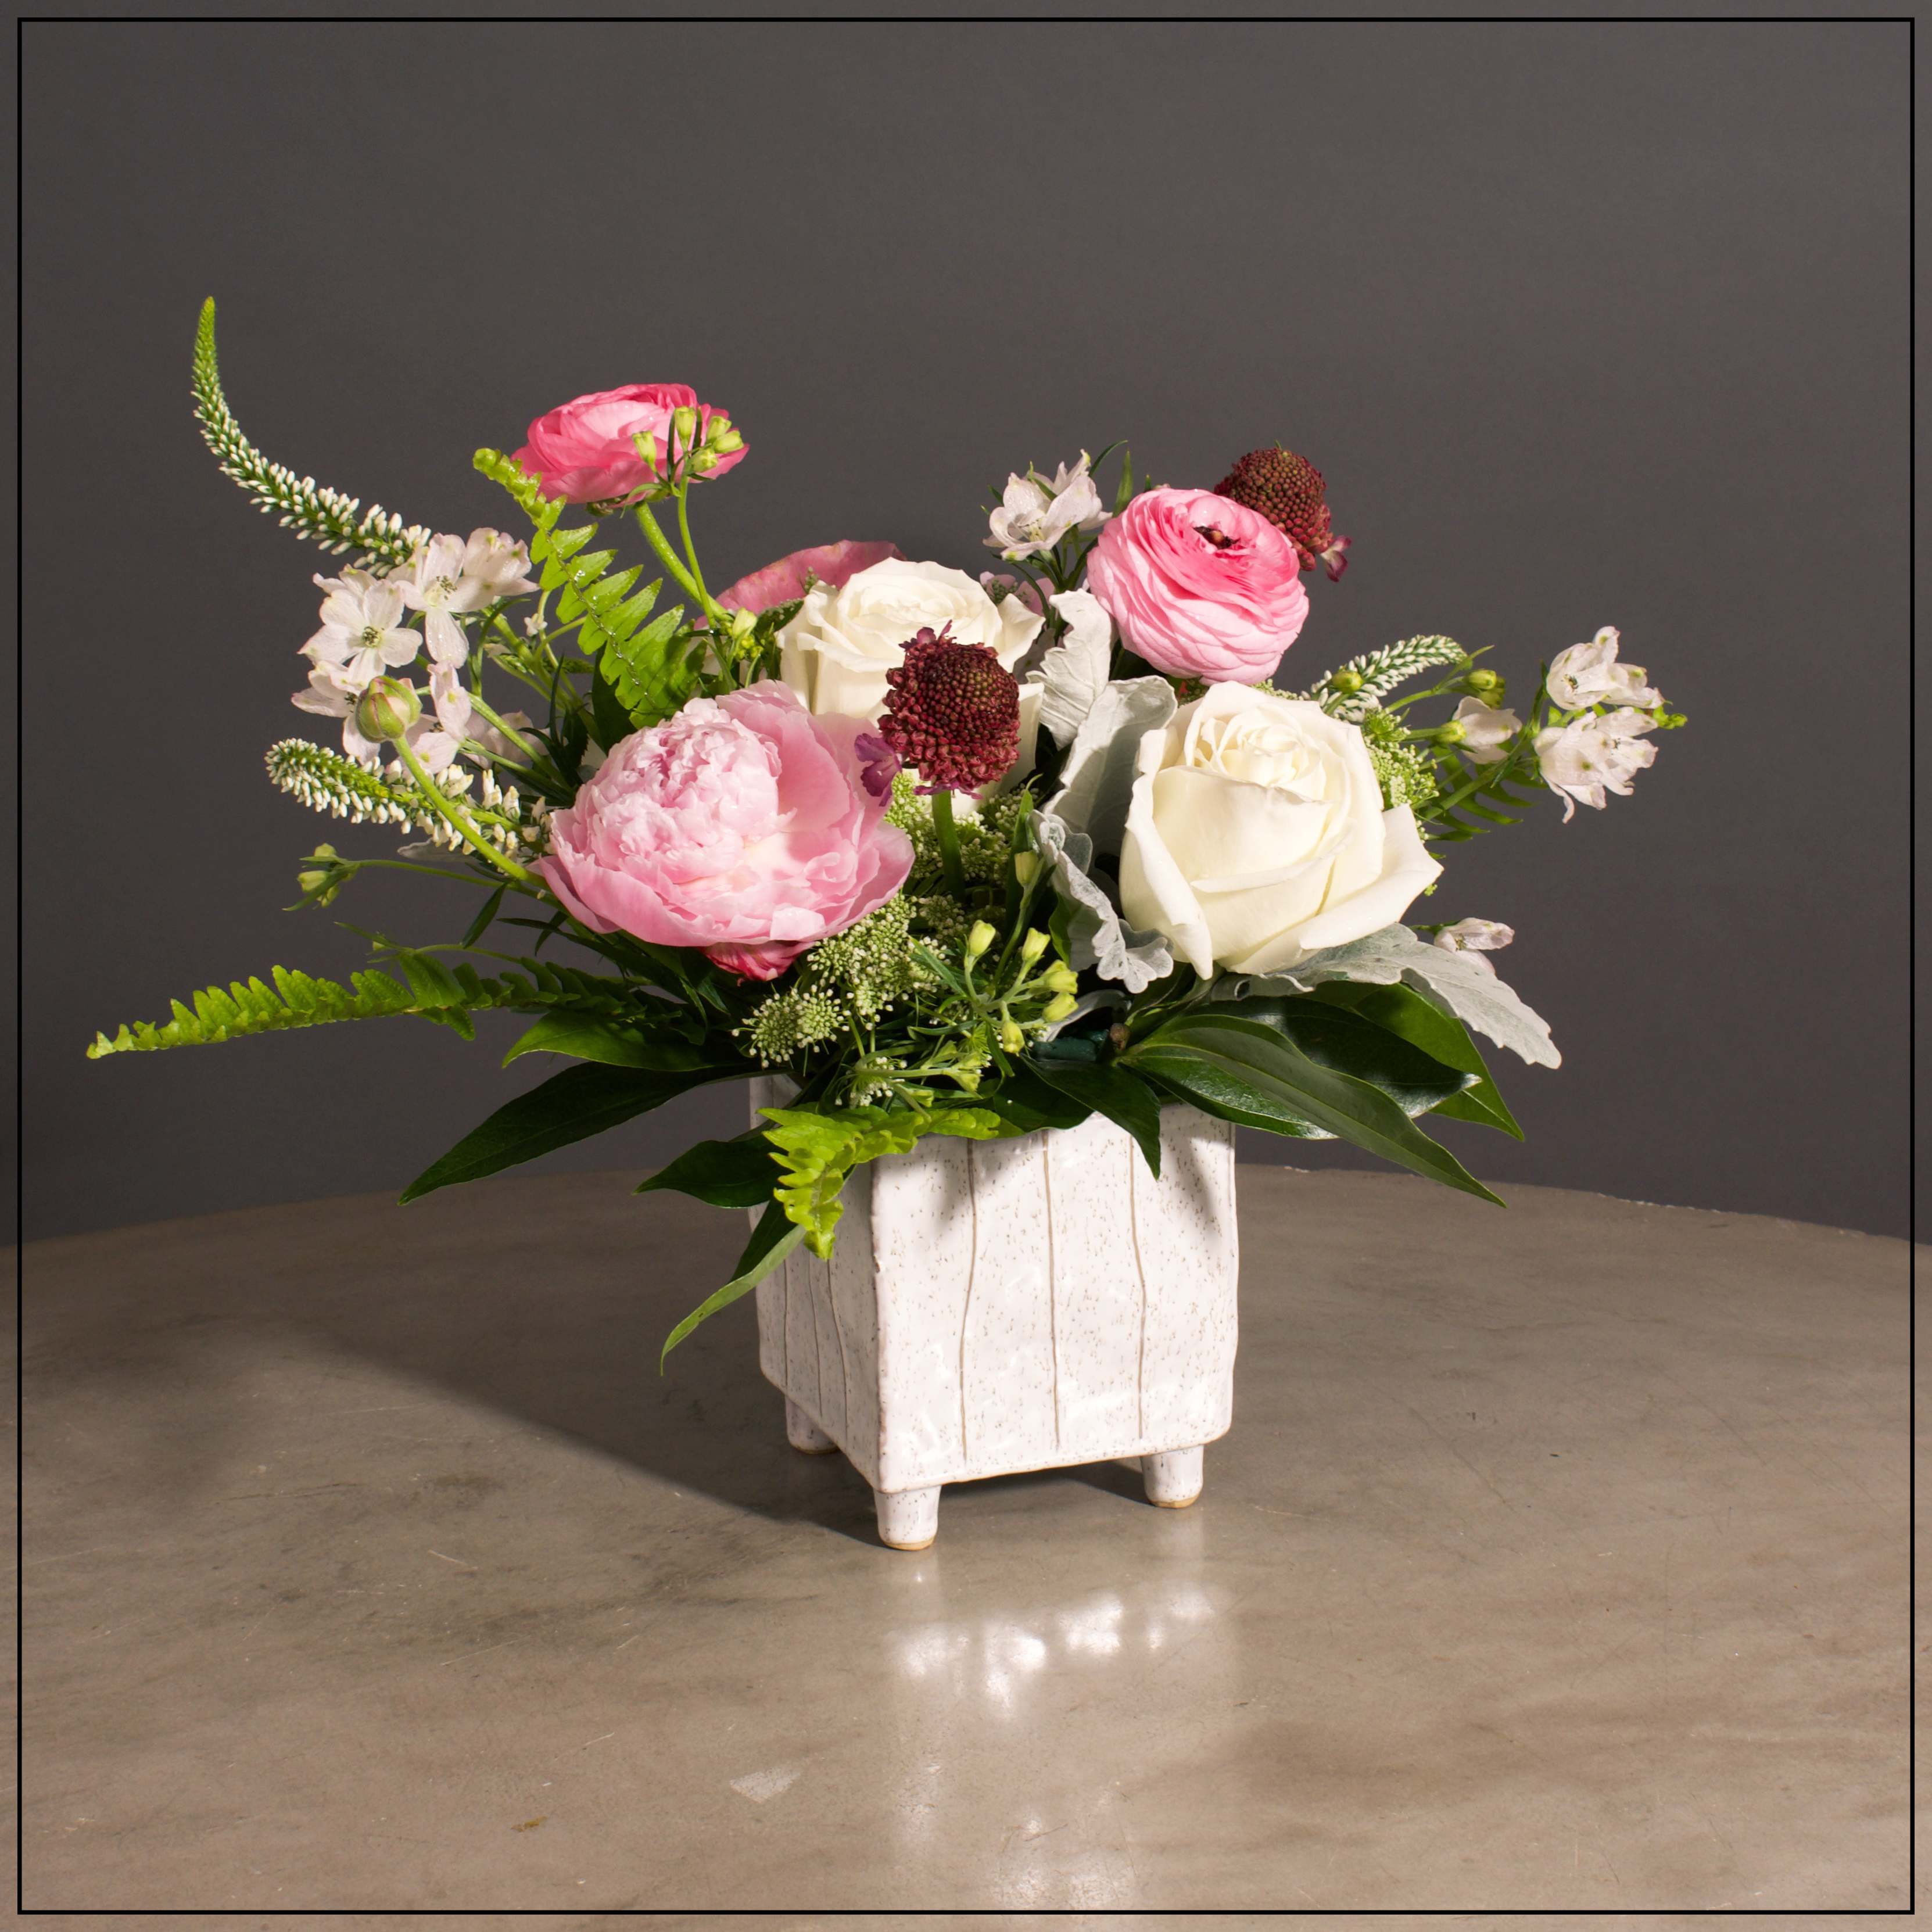 Peyton - Peonies, Roses, Veronica and Scabiosa with Mixed Greens in a White Footed Square Container.  Approximately 13&quot; H x 17&quot; W